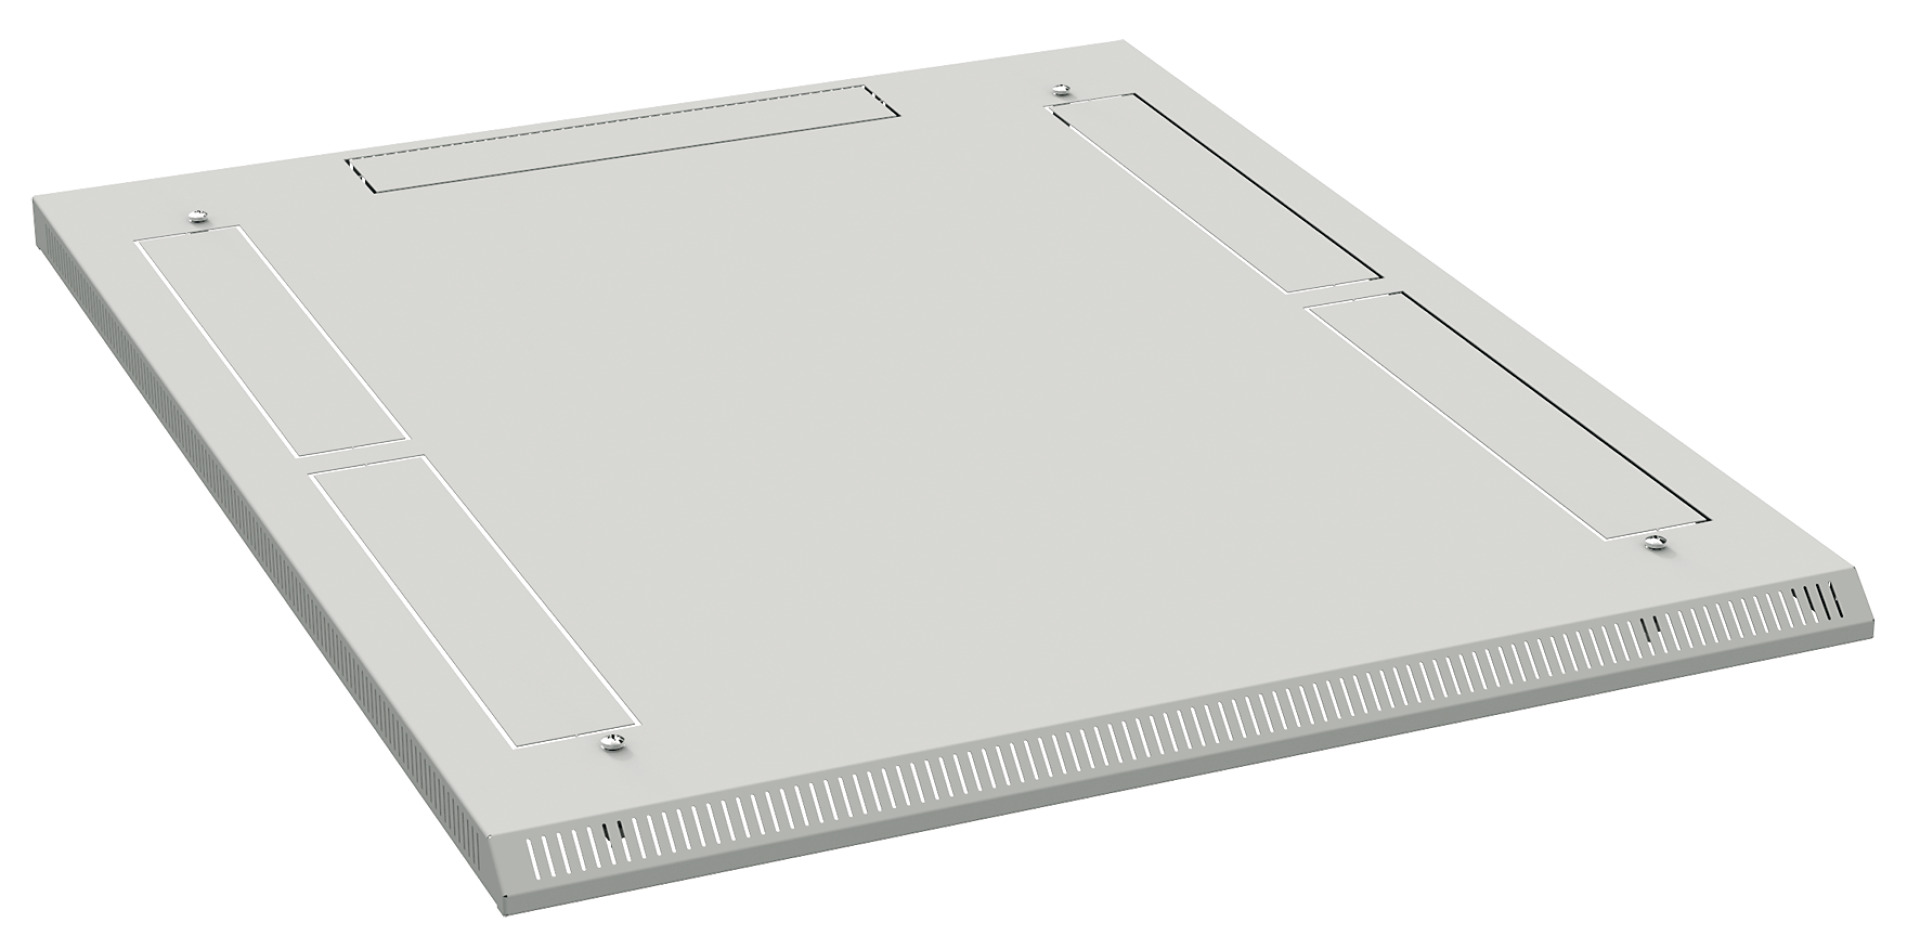 Additional Roof H=40 mm, 600x800 mm, RAL9005, for Cabinet Series PRO